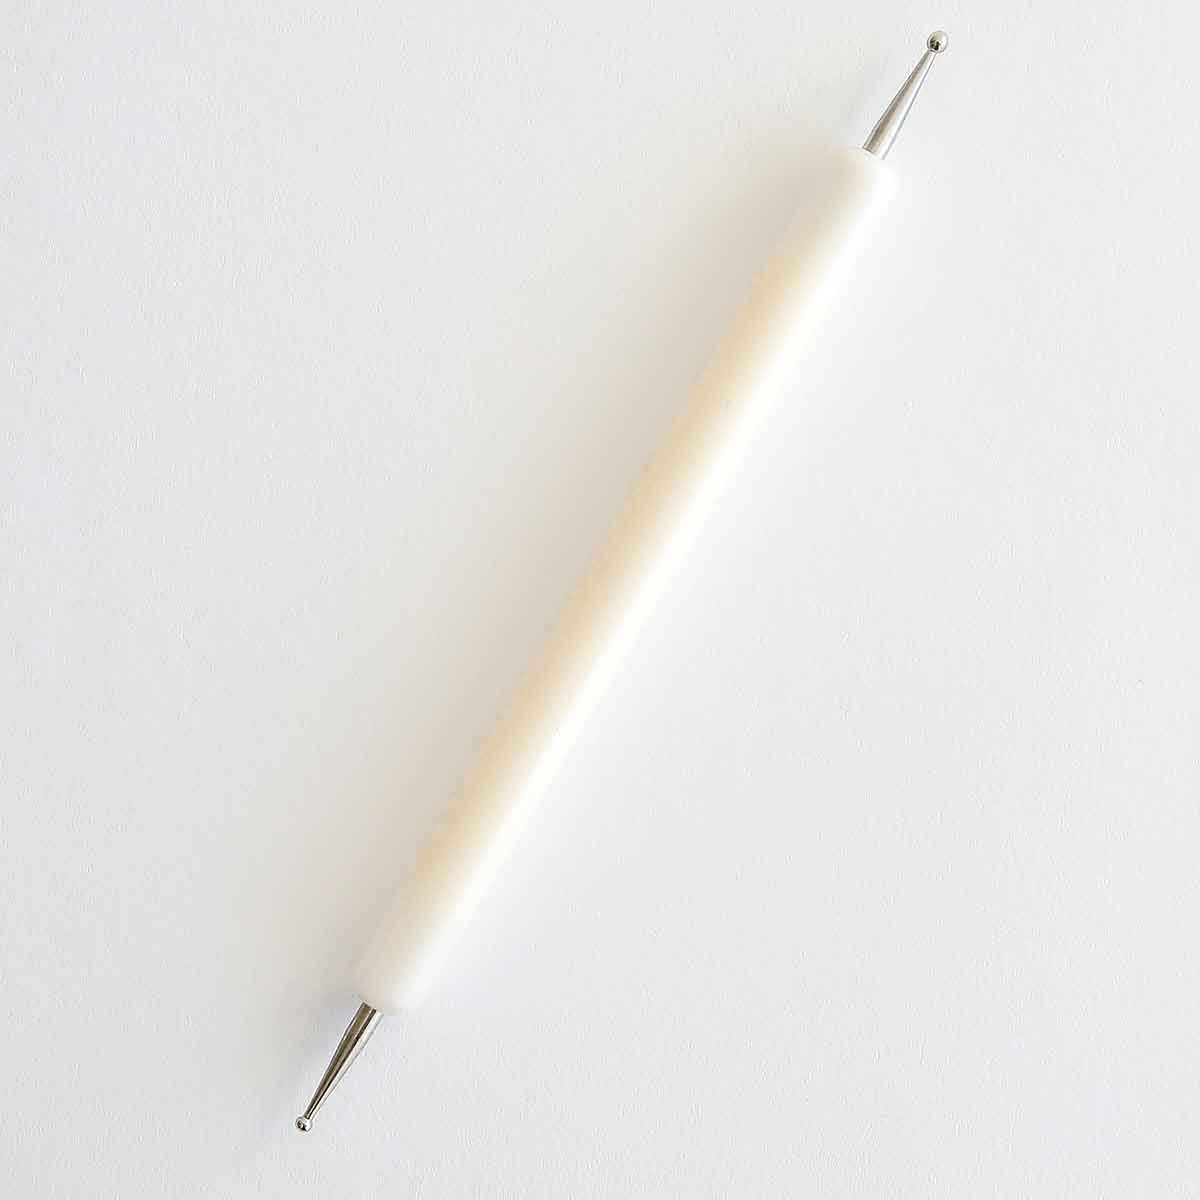 a white toothbrush on a white surface.